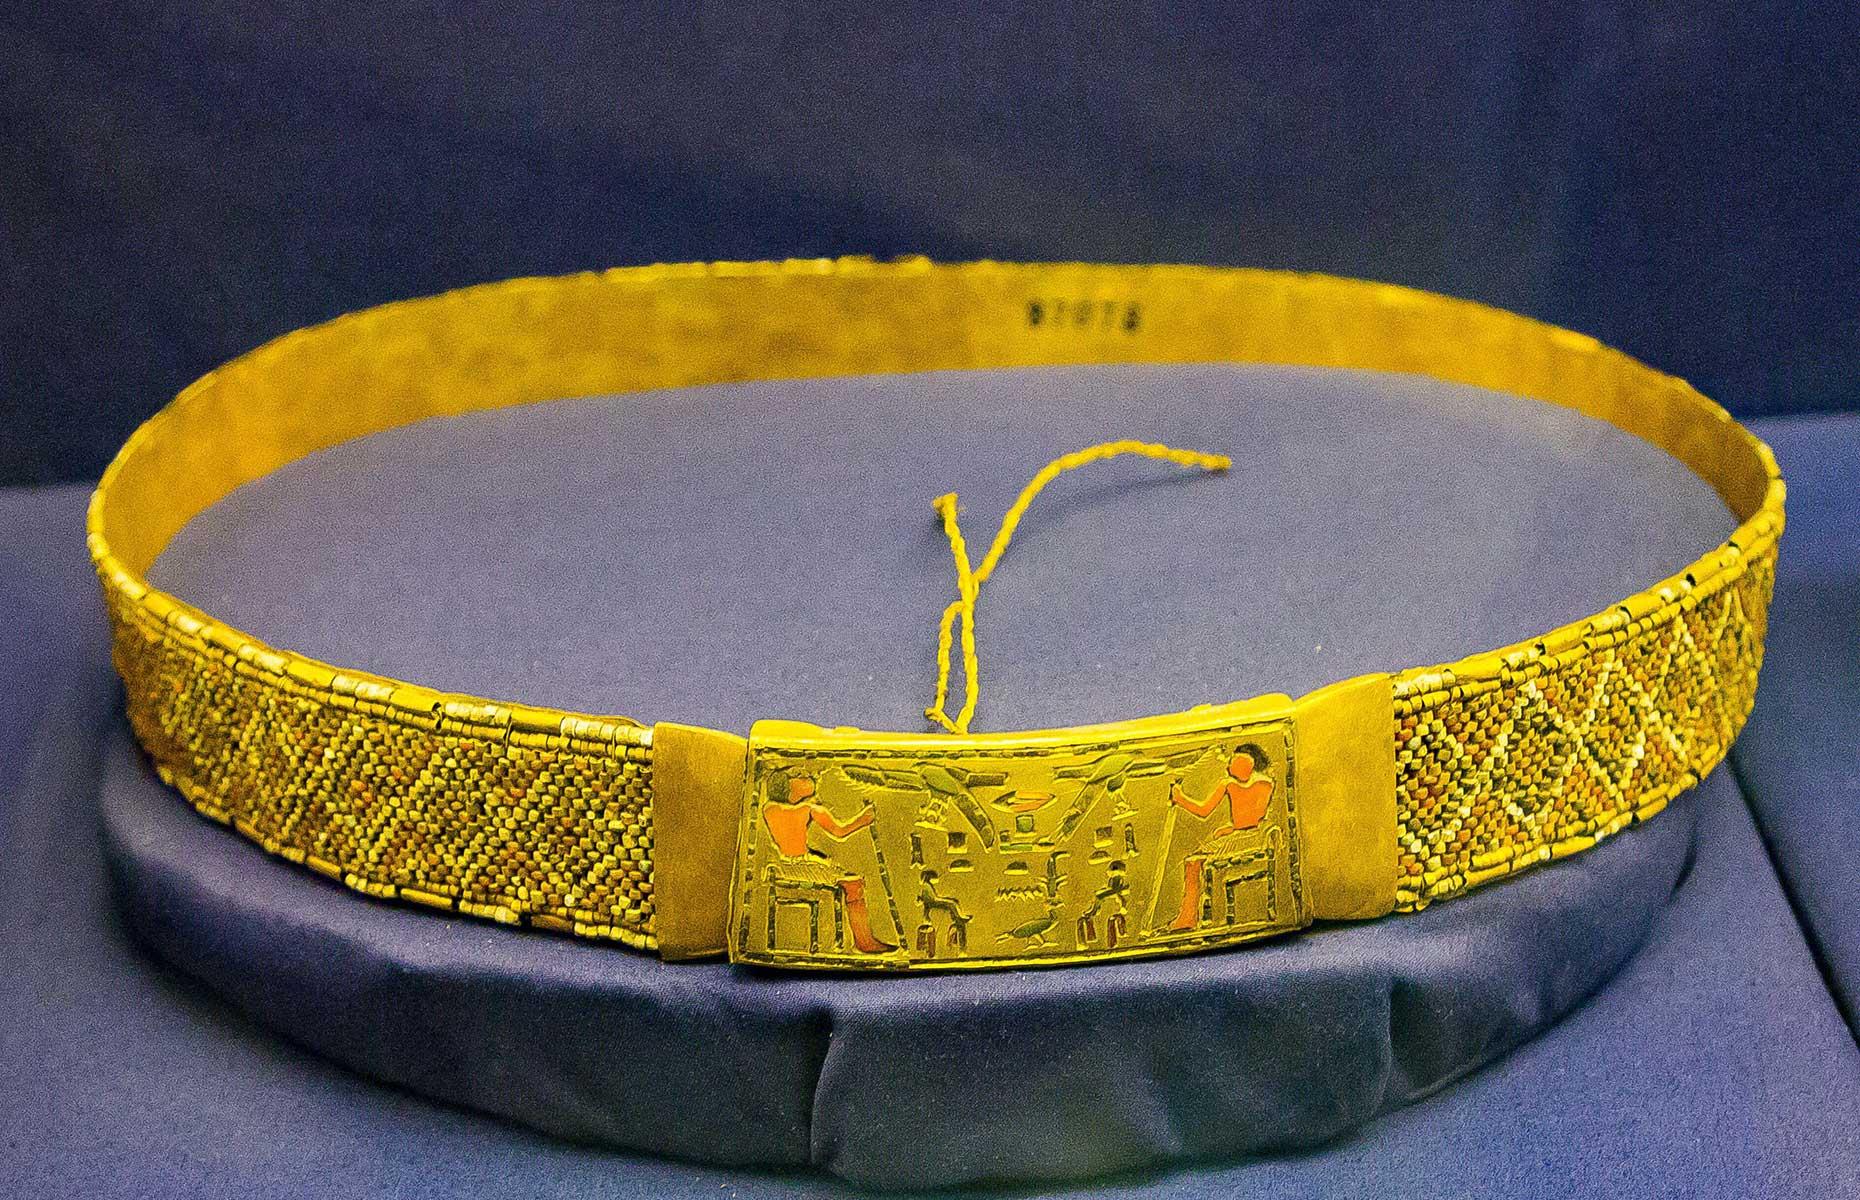 <p>Also found at the Saqqara site was this thin gold band measuring 90cm, placed among the mummy bandages of prince Ptah-Shepses. Dating back to 2323-2150 BC, <a href="https://egymonuments.gov.eg/collections/belt-of-prince-ptah-shepses-2/">red carnelian (gemstone) and volcanic glass beads</a> form angular, geometric patterns, while hieroglyphics are inscribed on the buckle.</p>